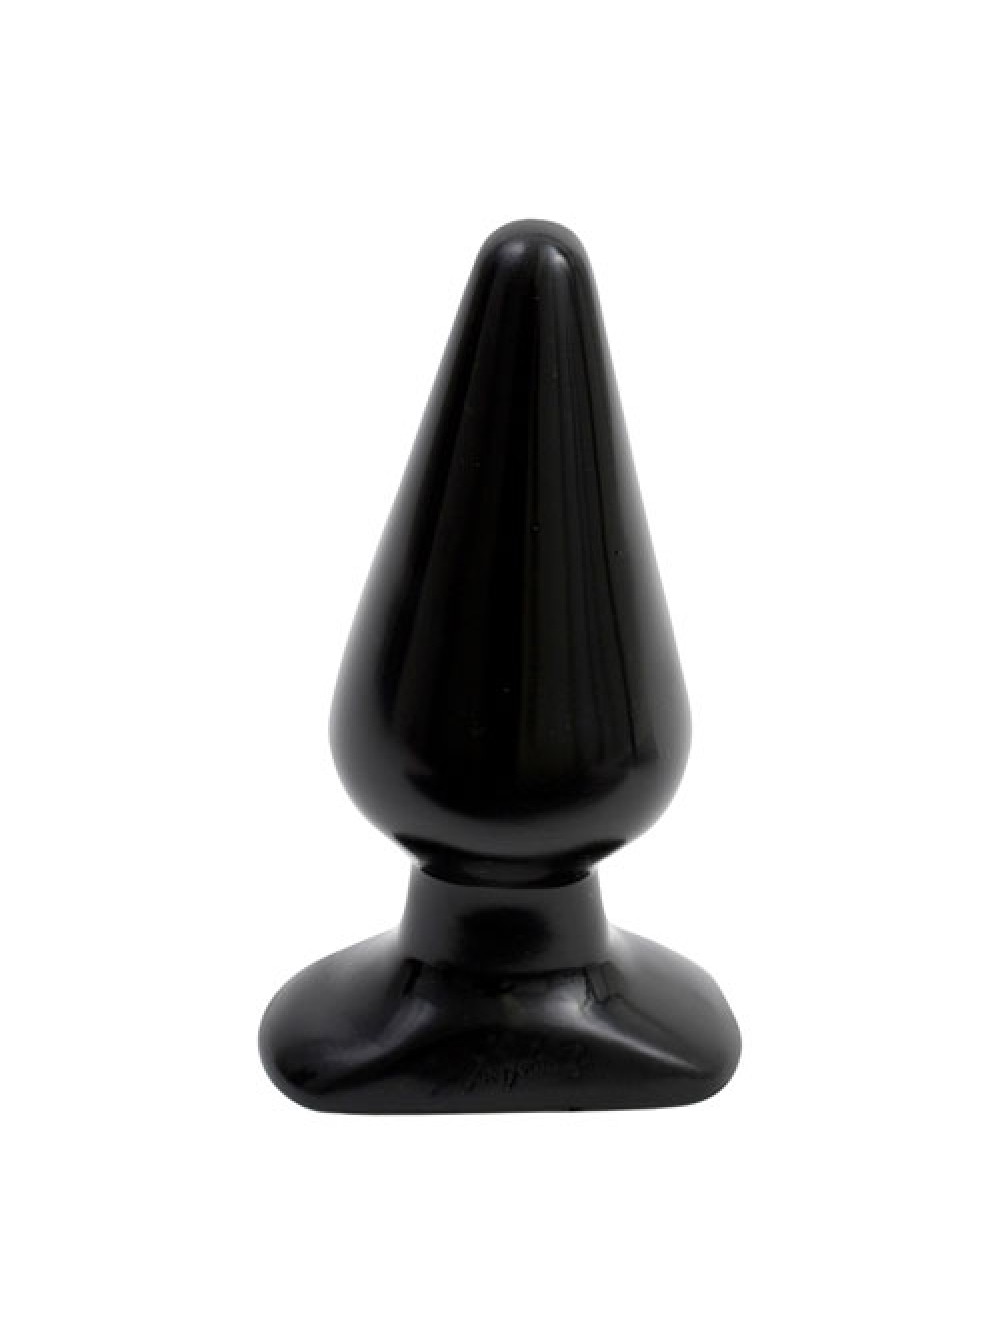 Butt Plug Black Large 5.5 Inches 0782421110802